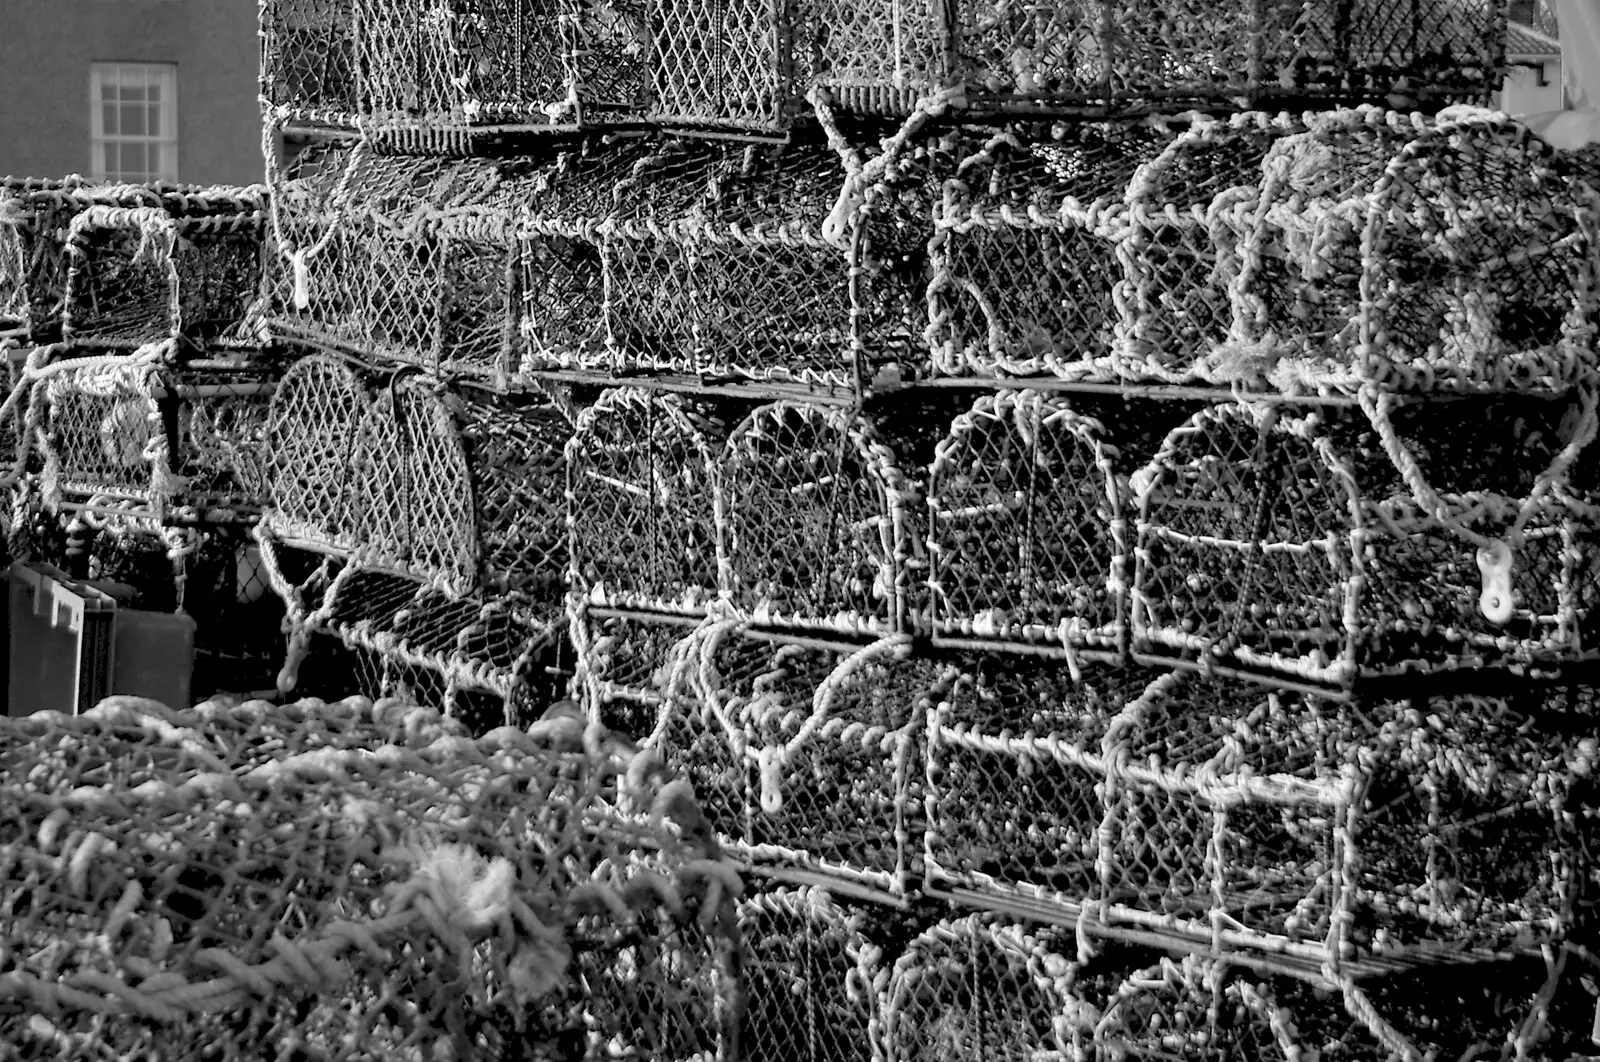 A big pile of lobster pots, from A Day with Sis, Matt and the Old Man, Saxmundham, Suffolk - 28th December 2004